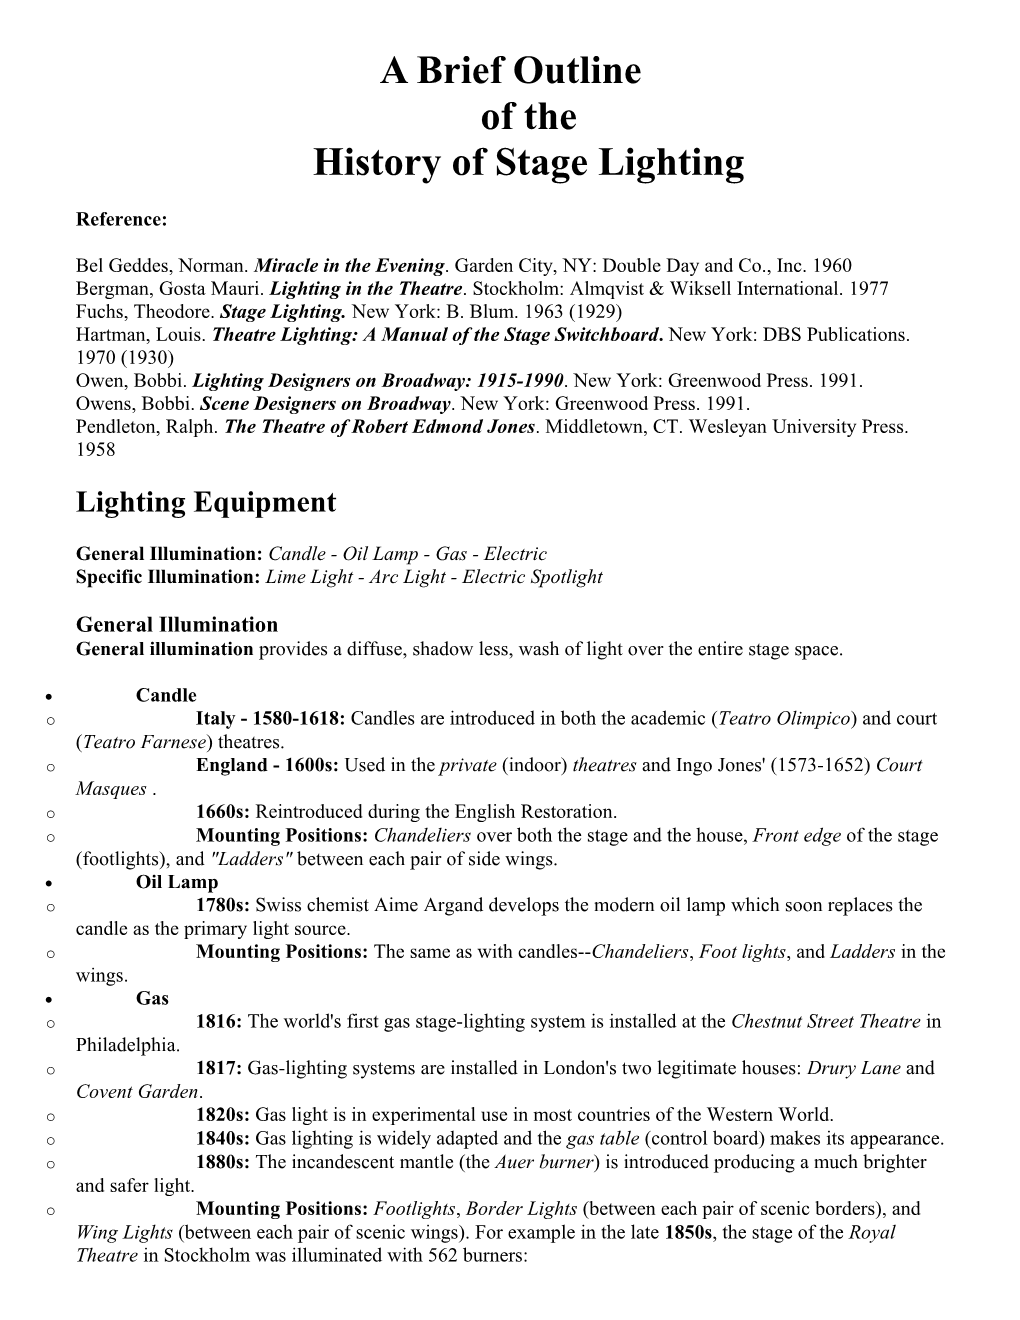 A Brief Outlineof Thehistory of Stage Lighting